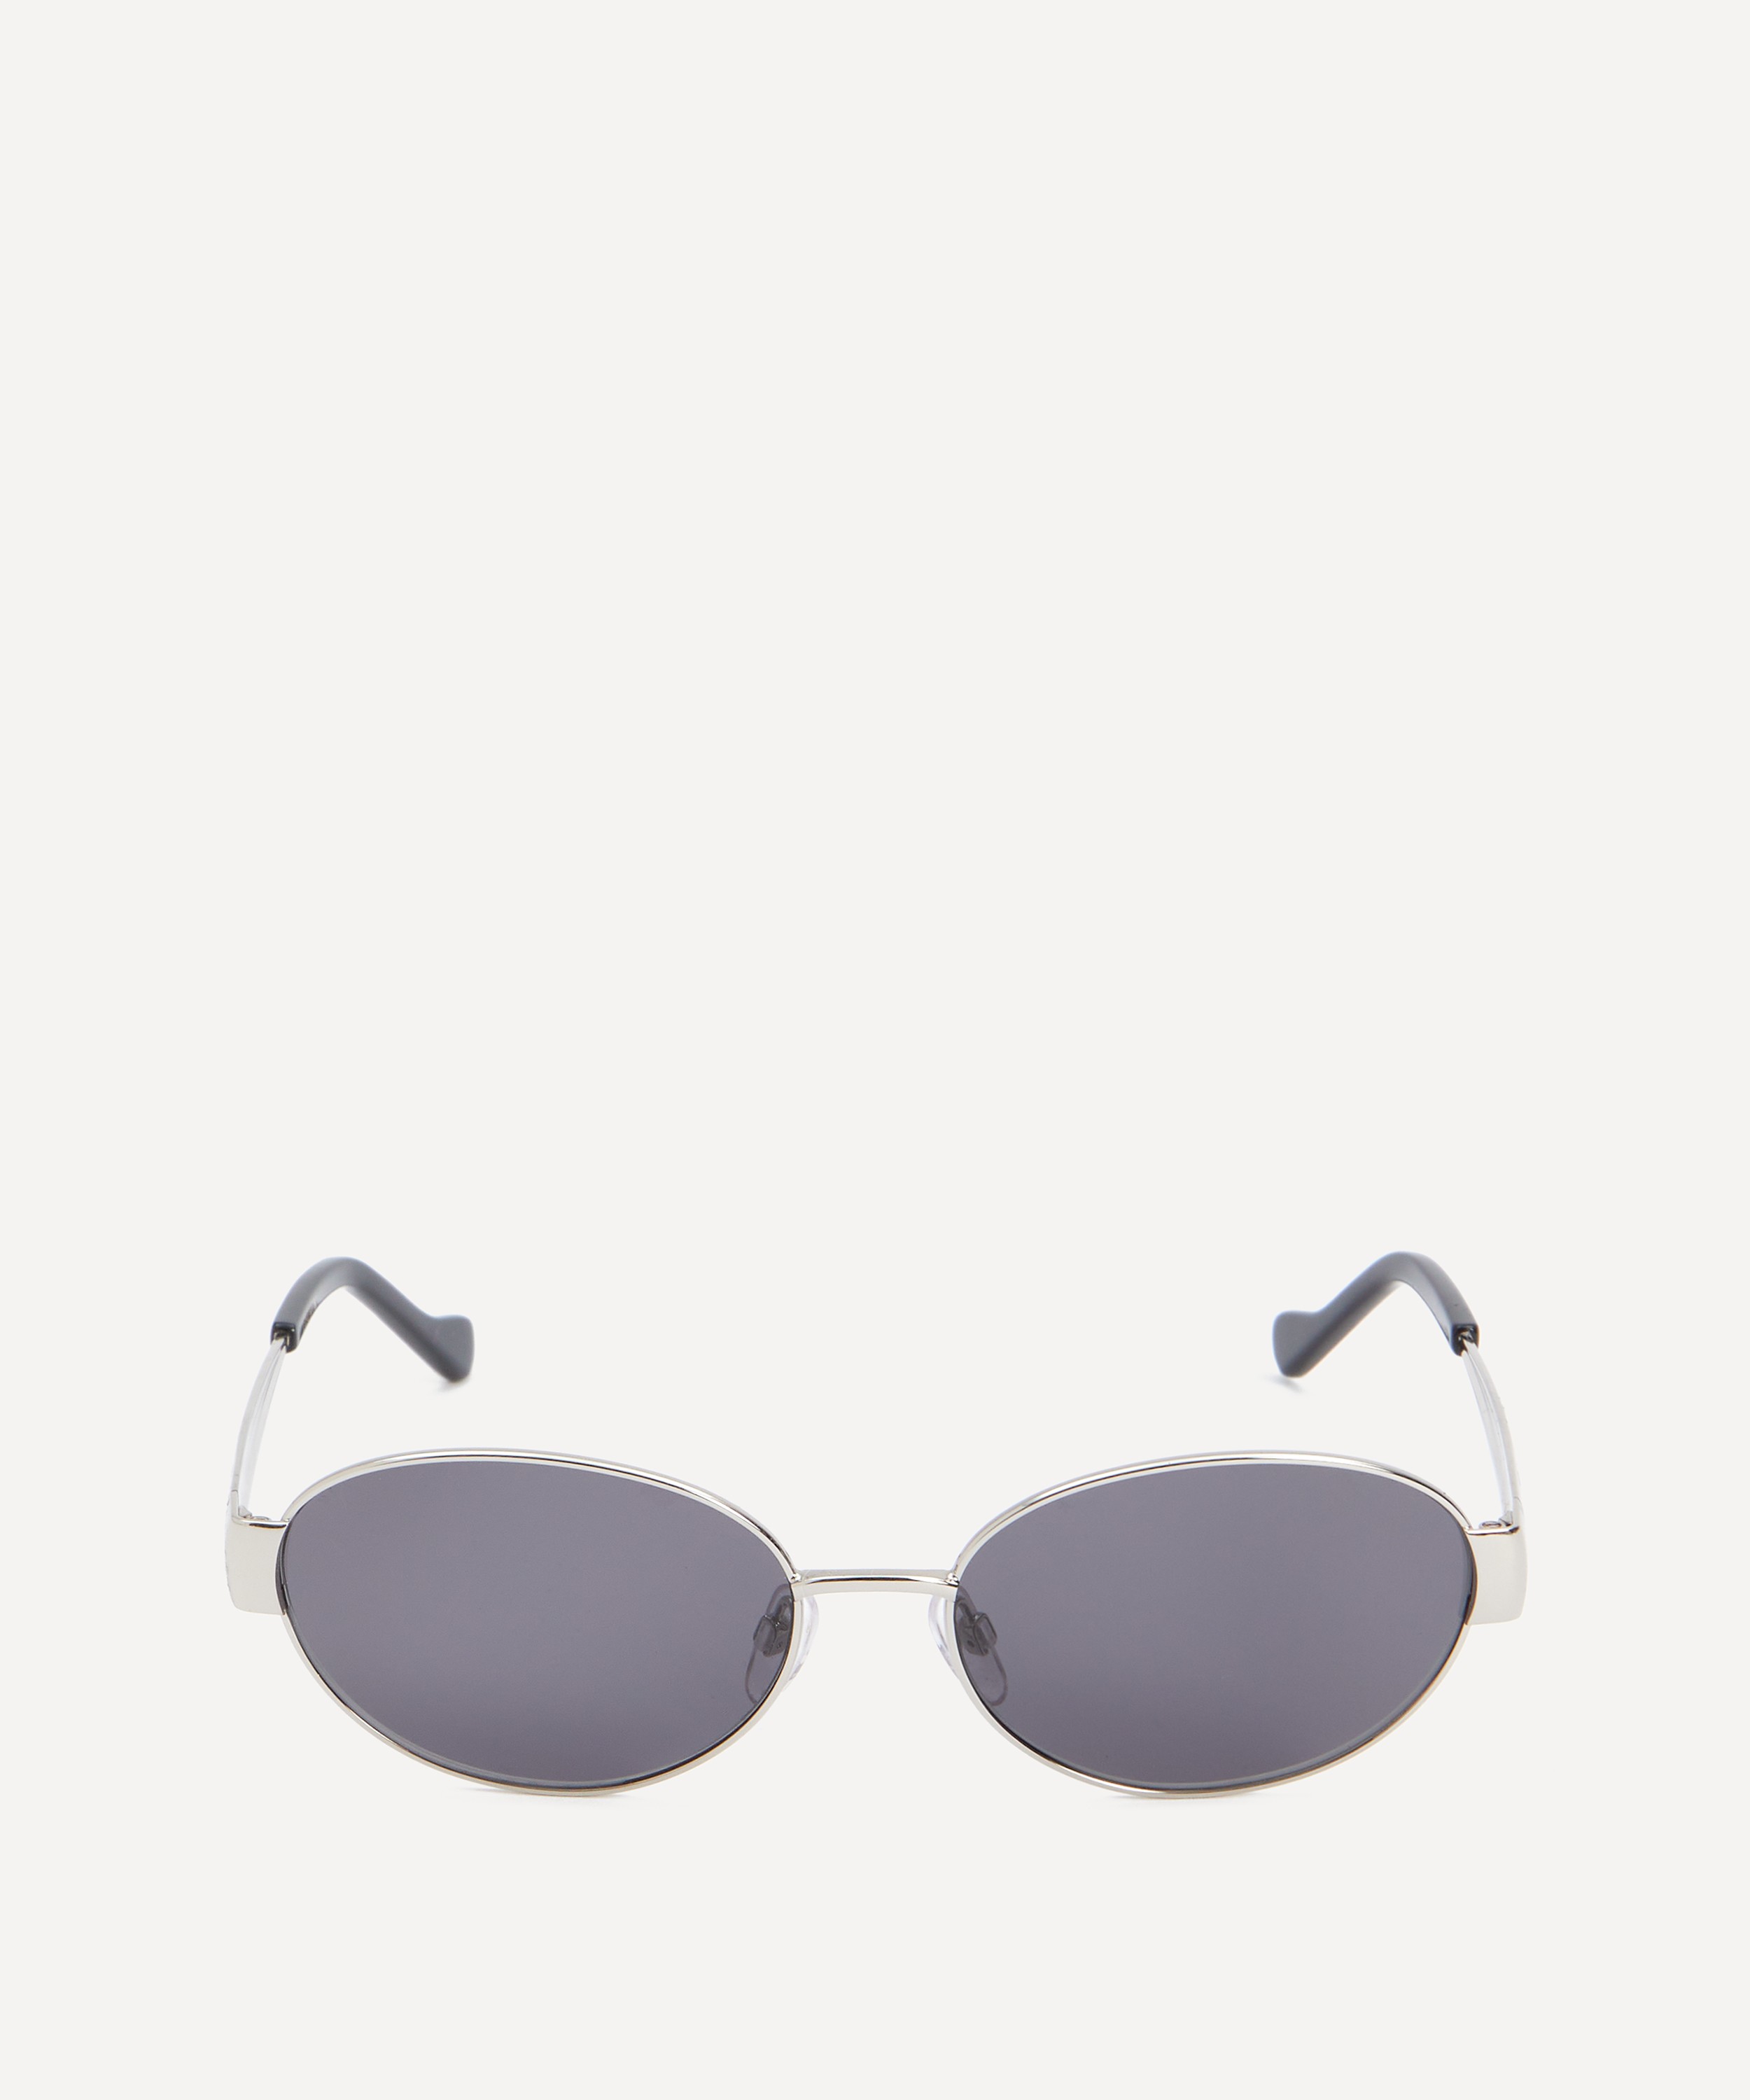 Liberty - Oval Sunglasses image number 0